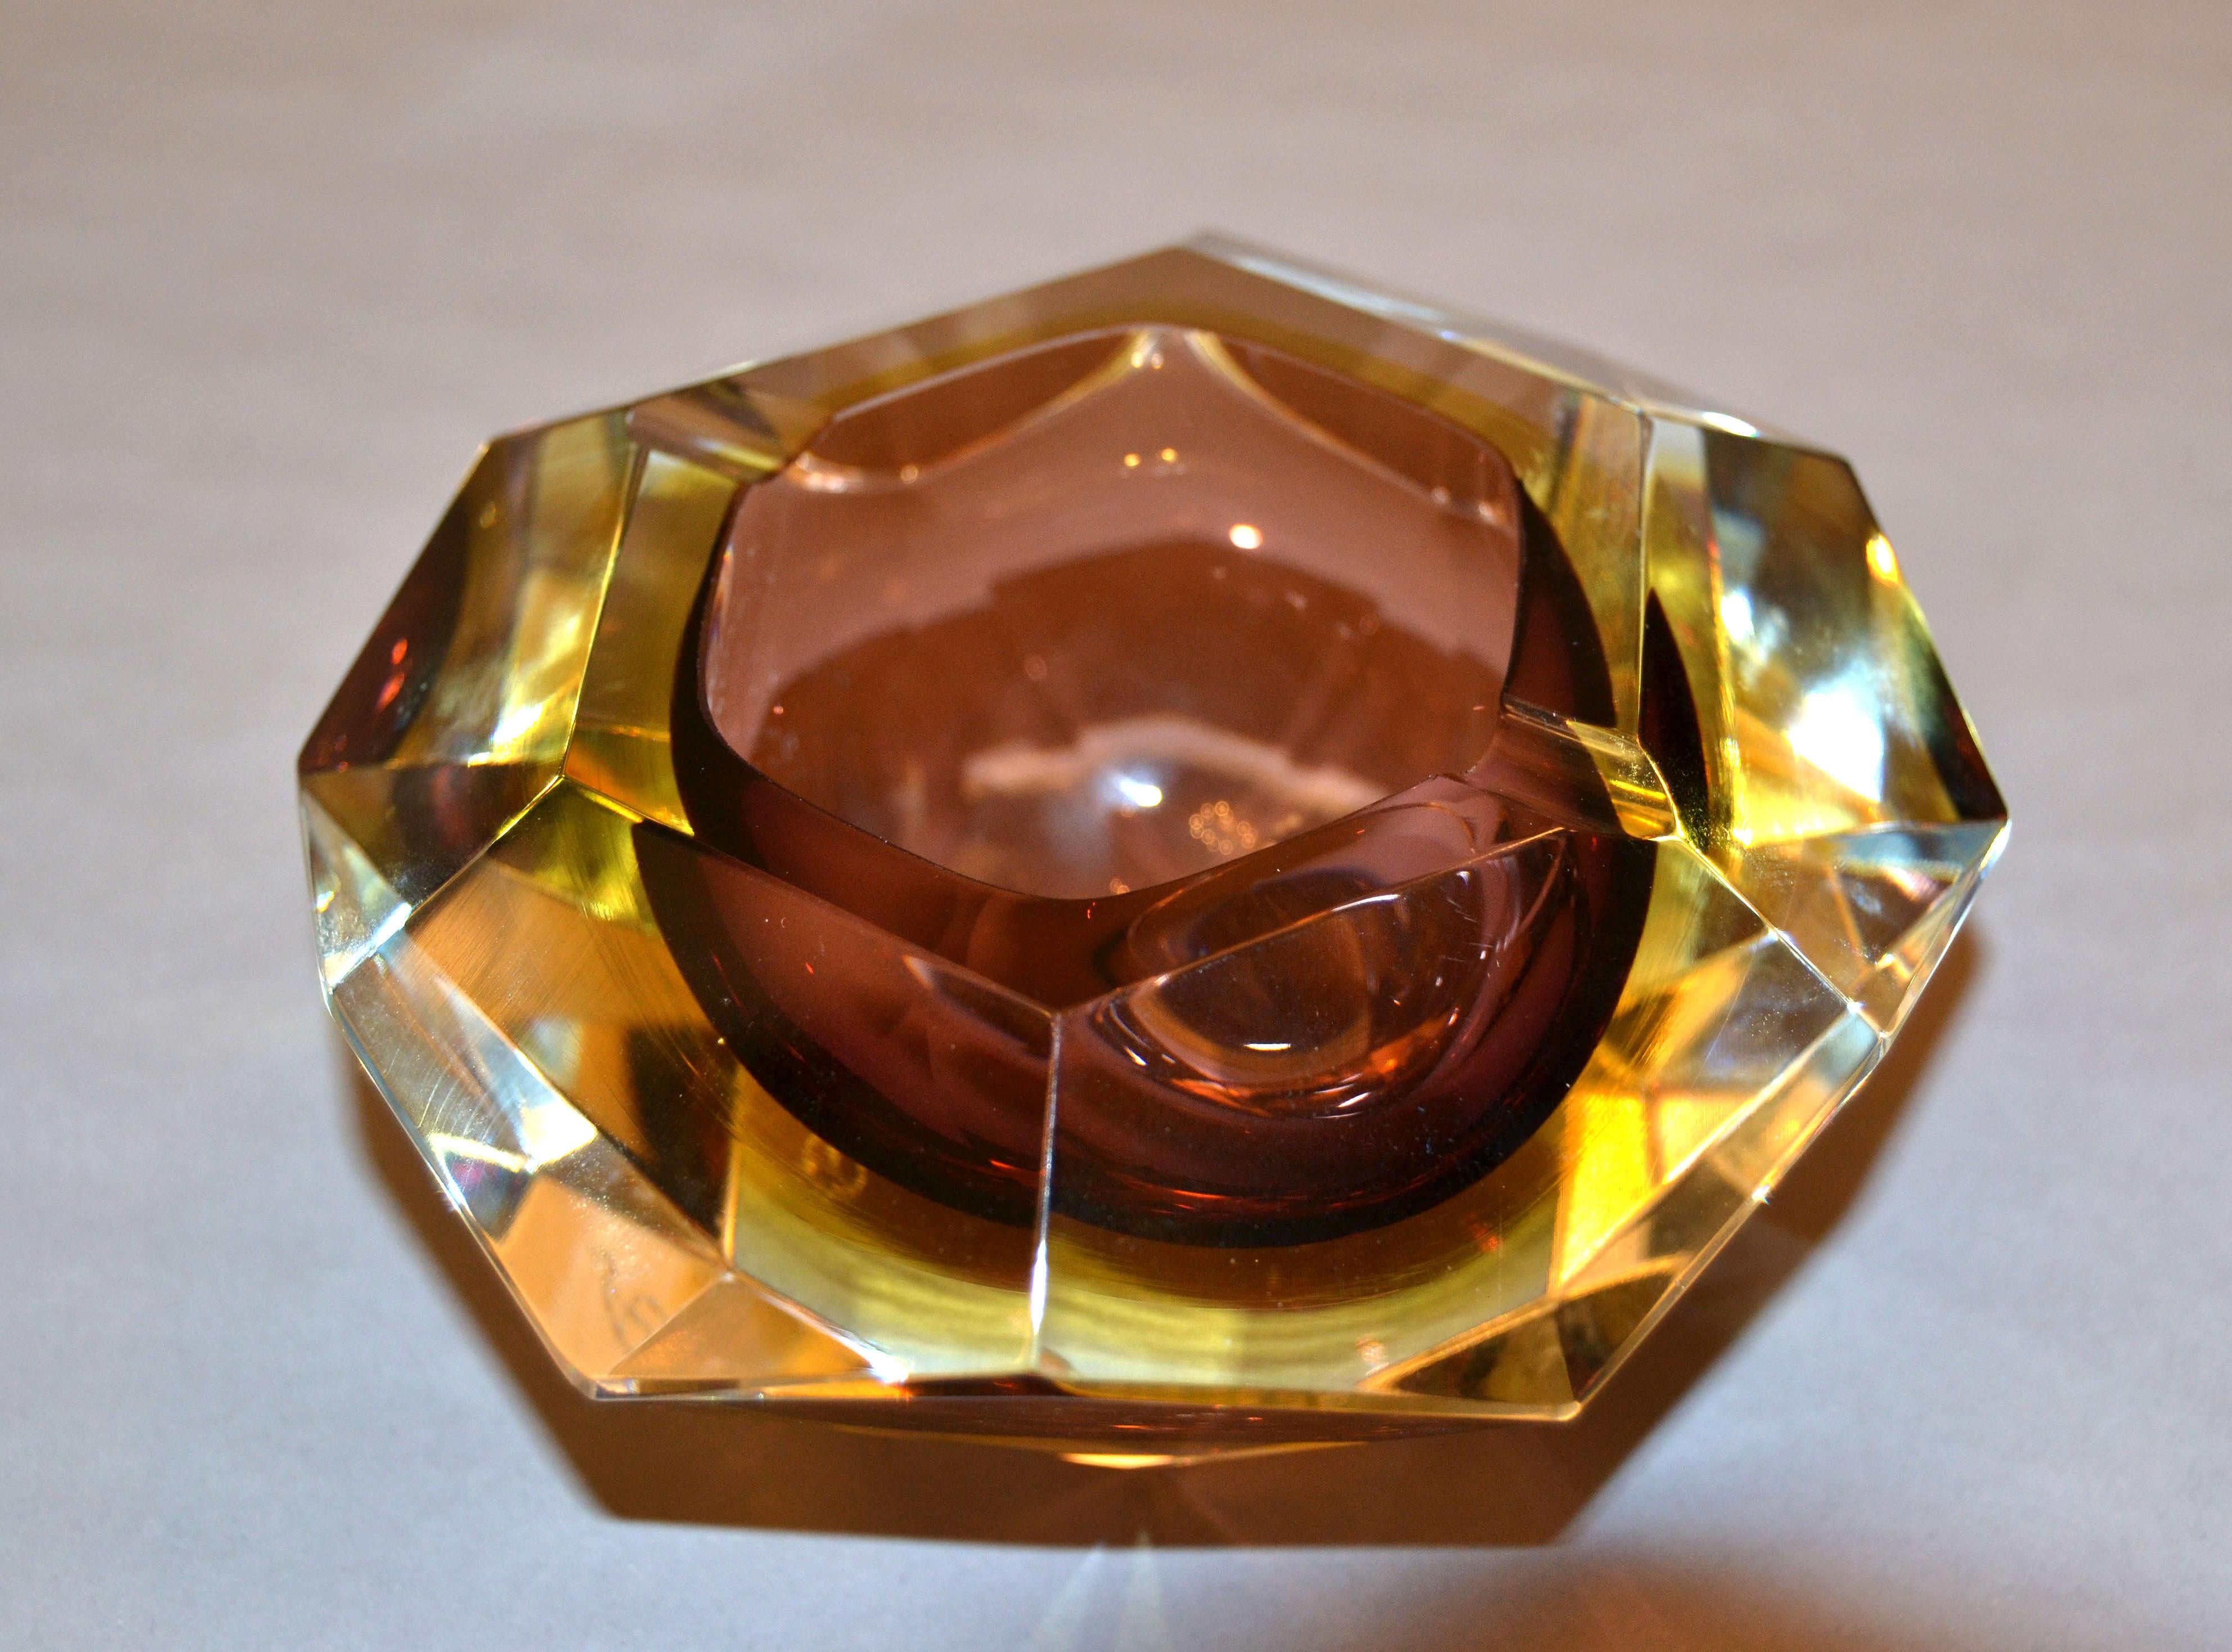 Multifaceted brown and yellow Sommerso Murano glass ashtray, glass bowl attributed to Flavio Poli.
Brown and amber glass cased into clear glass and a highly decorative twelve faced geometric design.
Signed underneath by Artist.
 